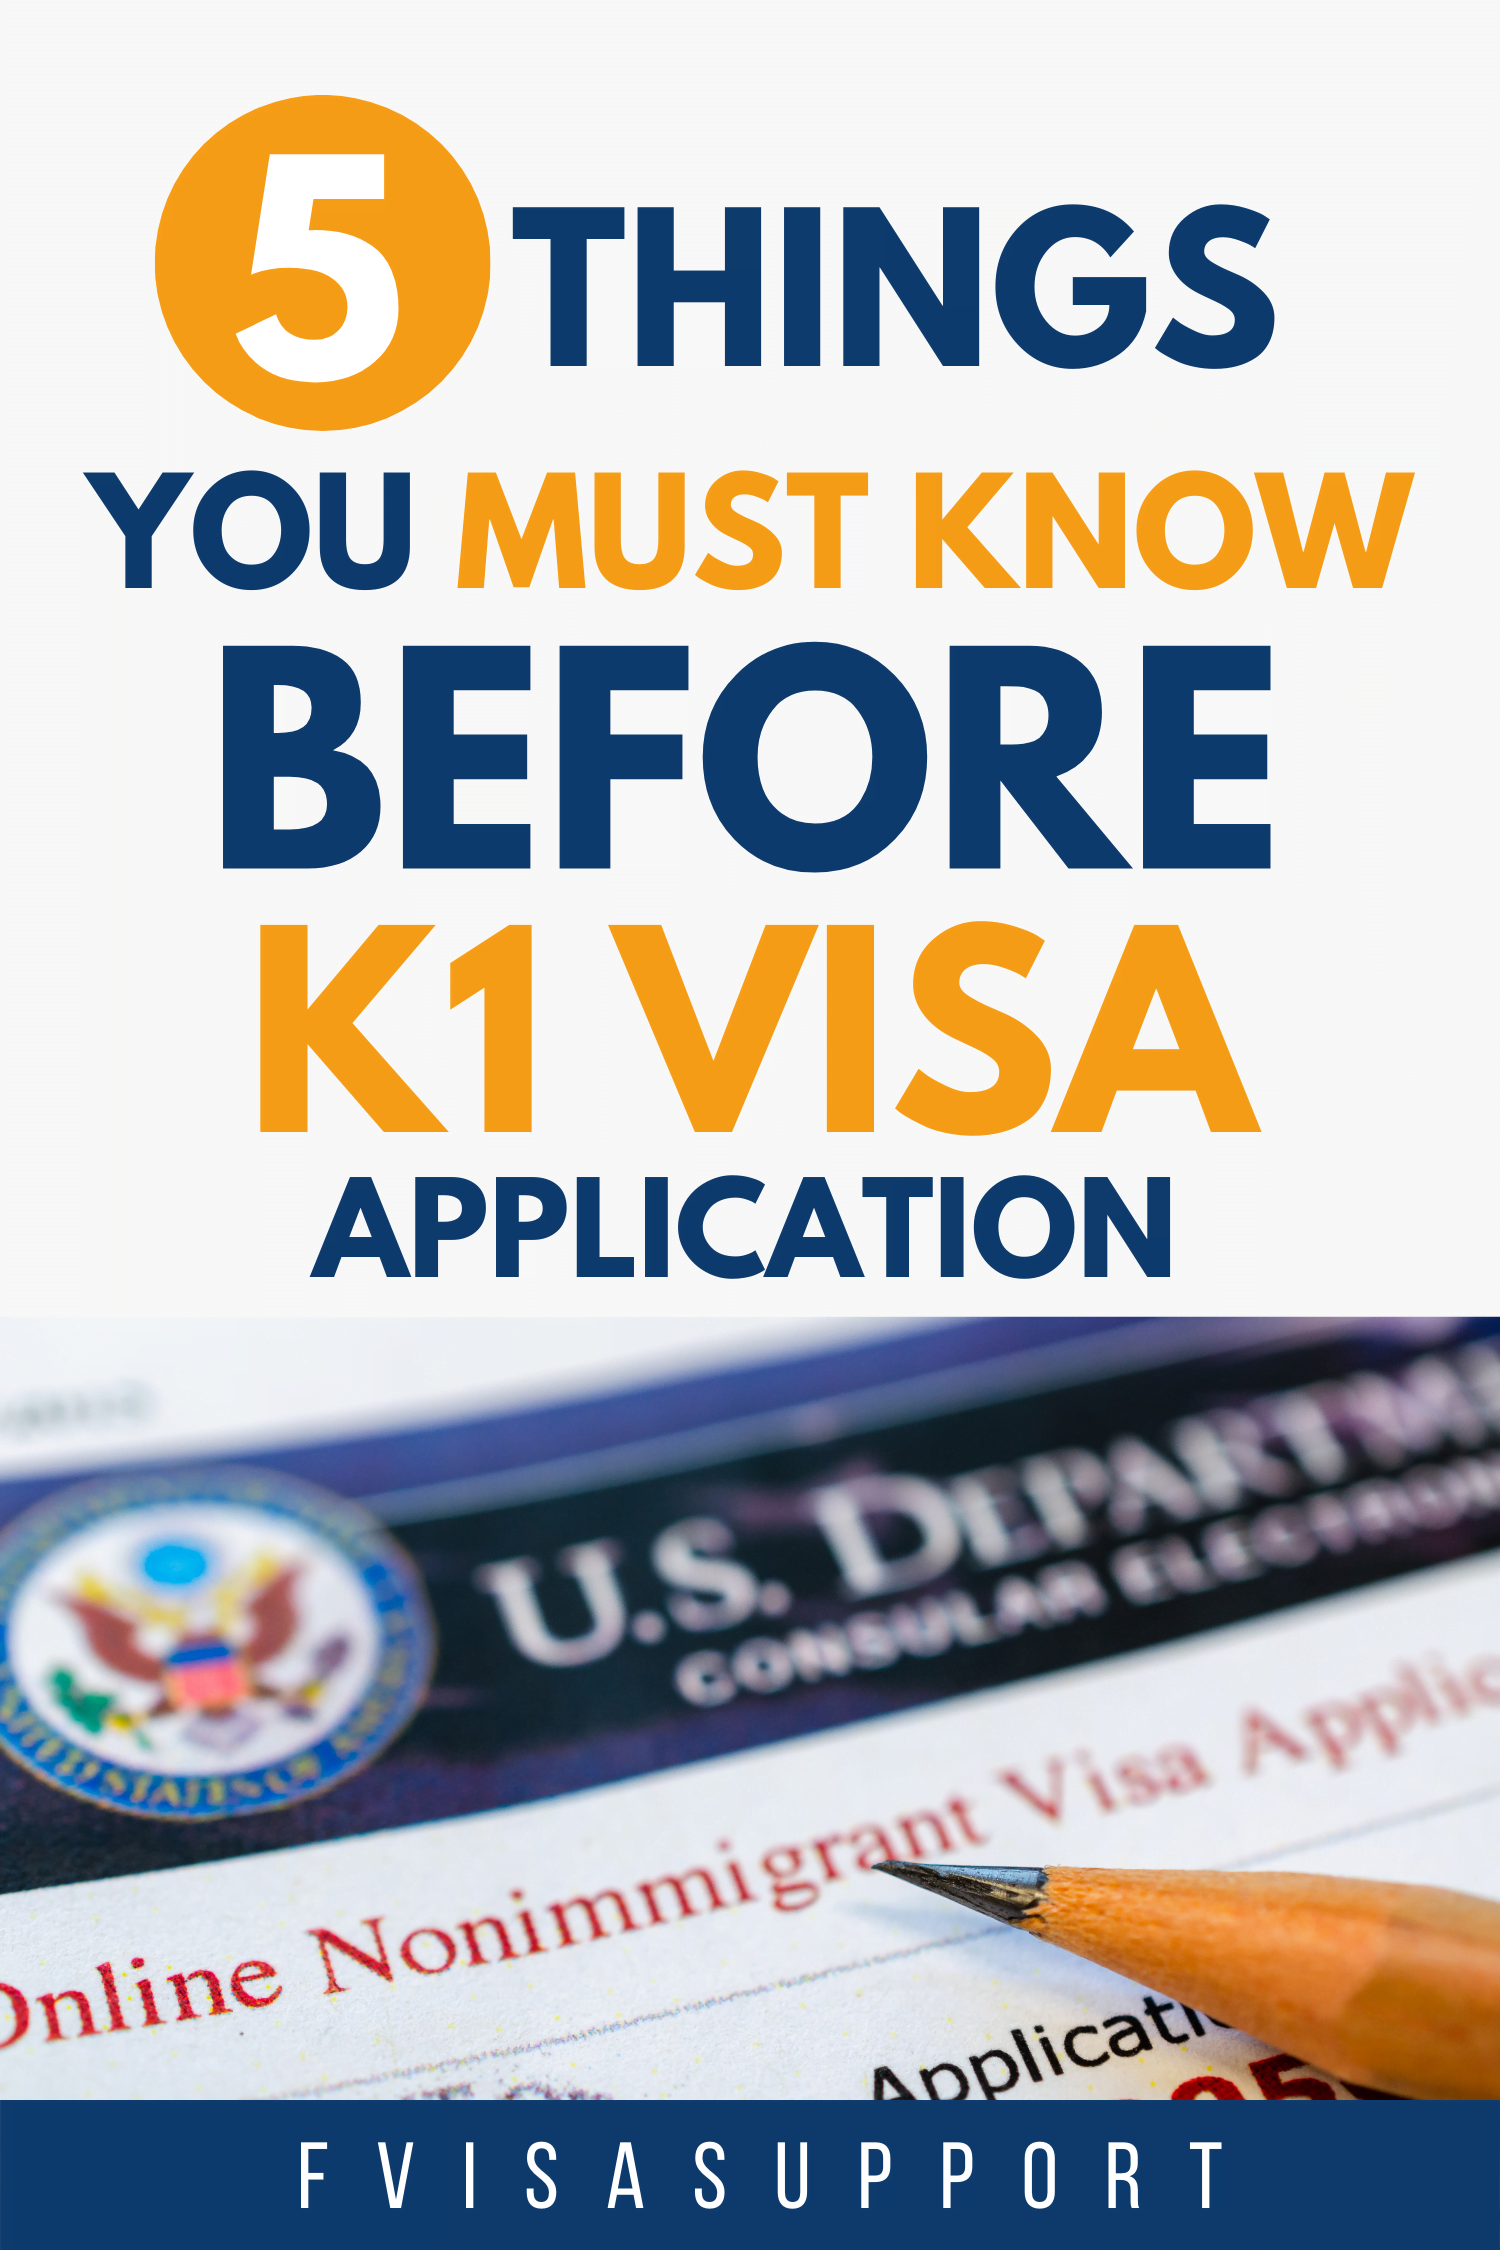 5 Things to Know Before You Apply for Visa Online